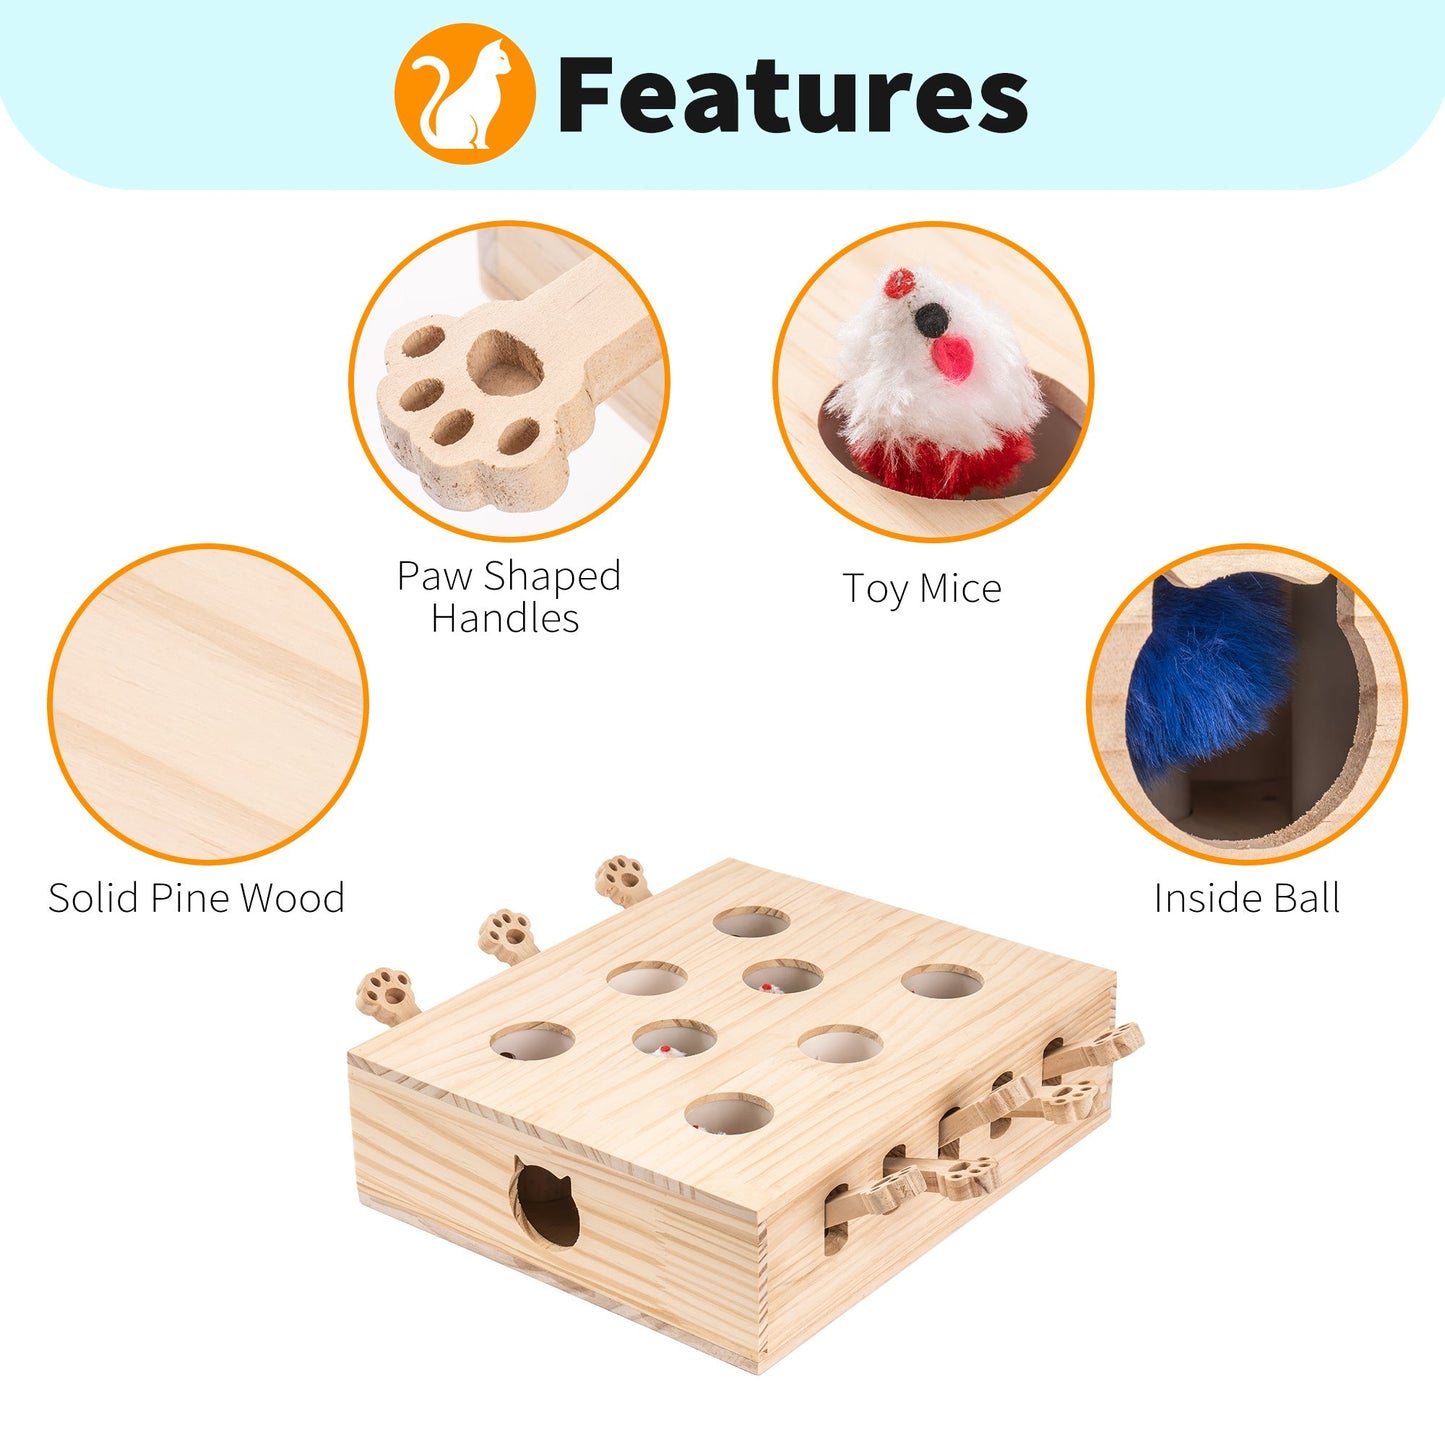 Mewoofun 8 Holes Cat Toys Interactive Whack-a-mole Solid Wood Toys for